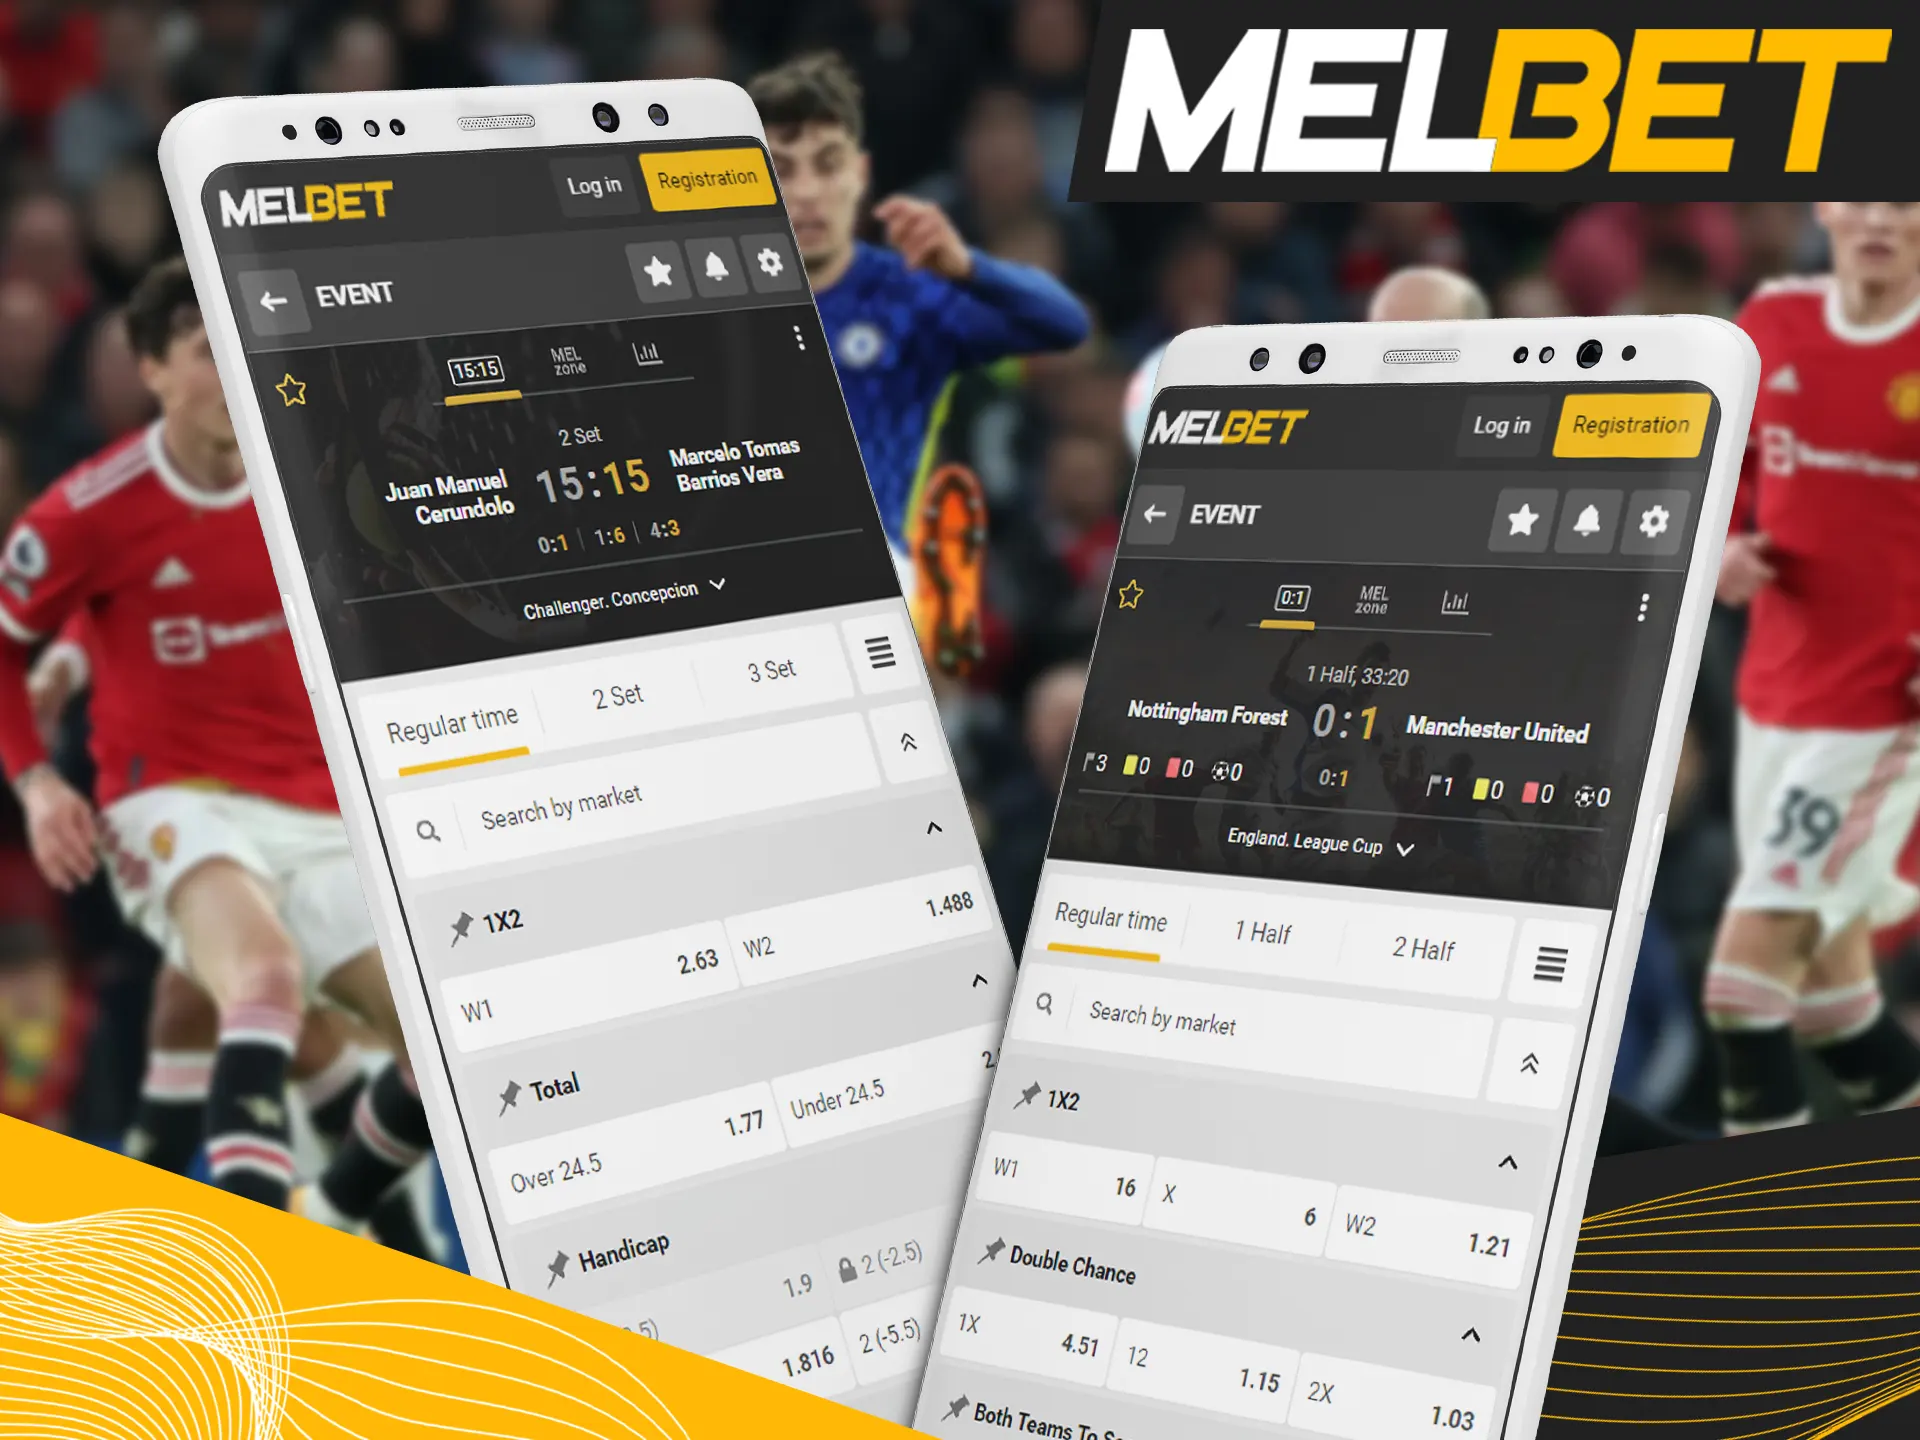 Place multiple games and watch them in live.